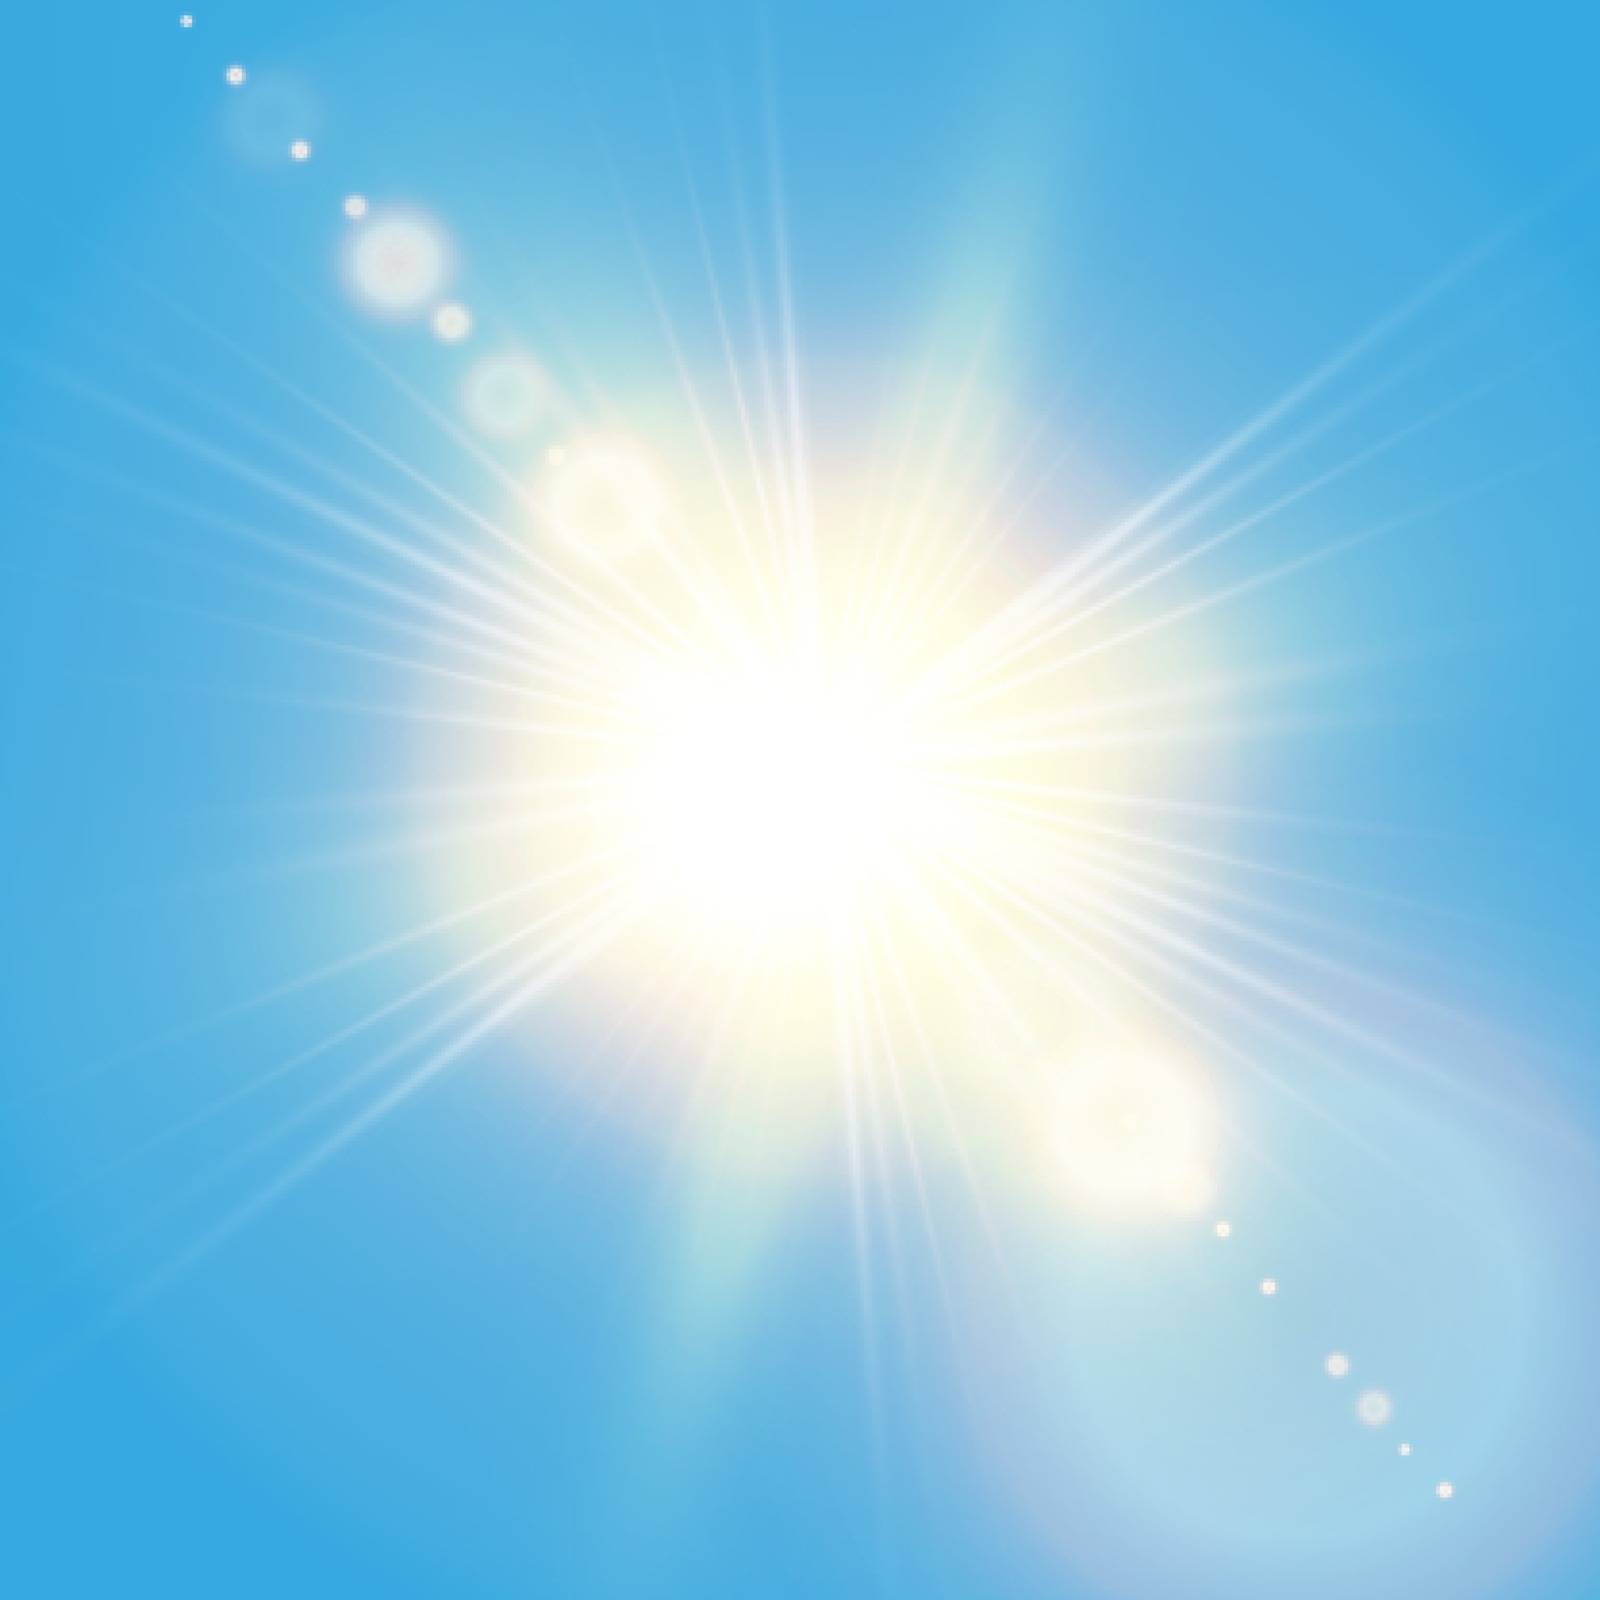 Realistic shining sun with lens flare. Blue sky with clouds background. Vector illustration by Denzelll